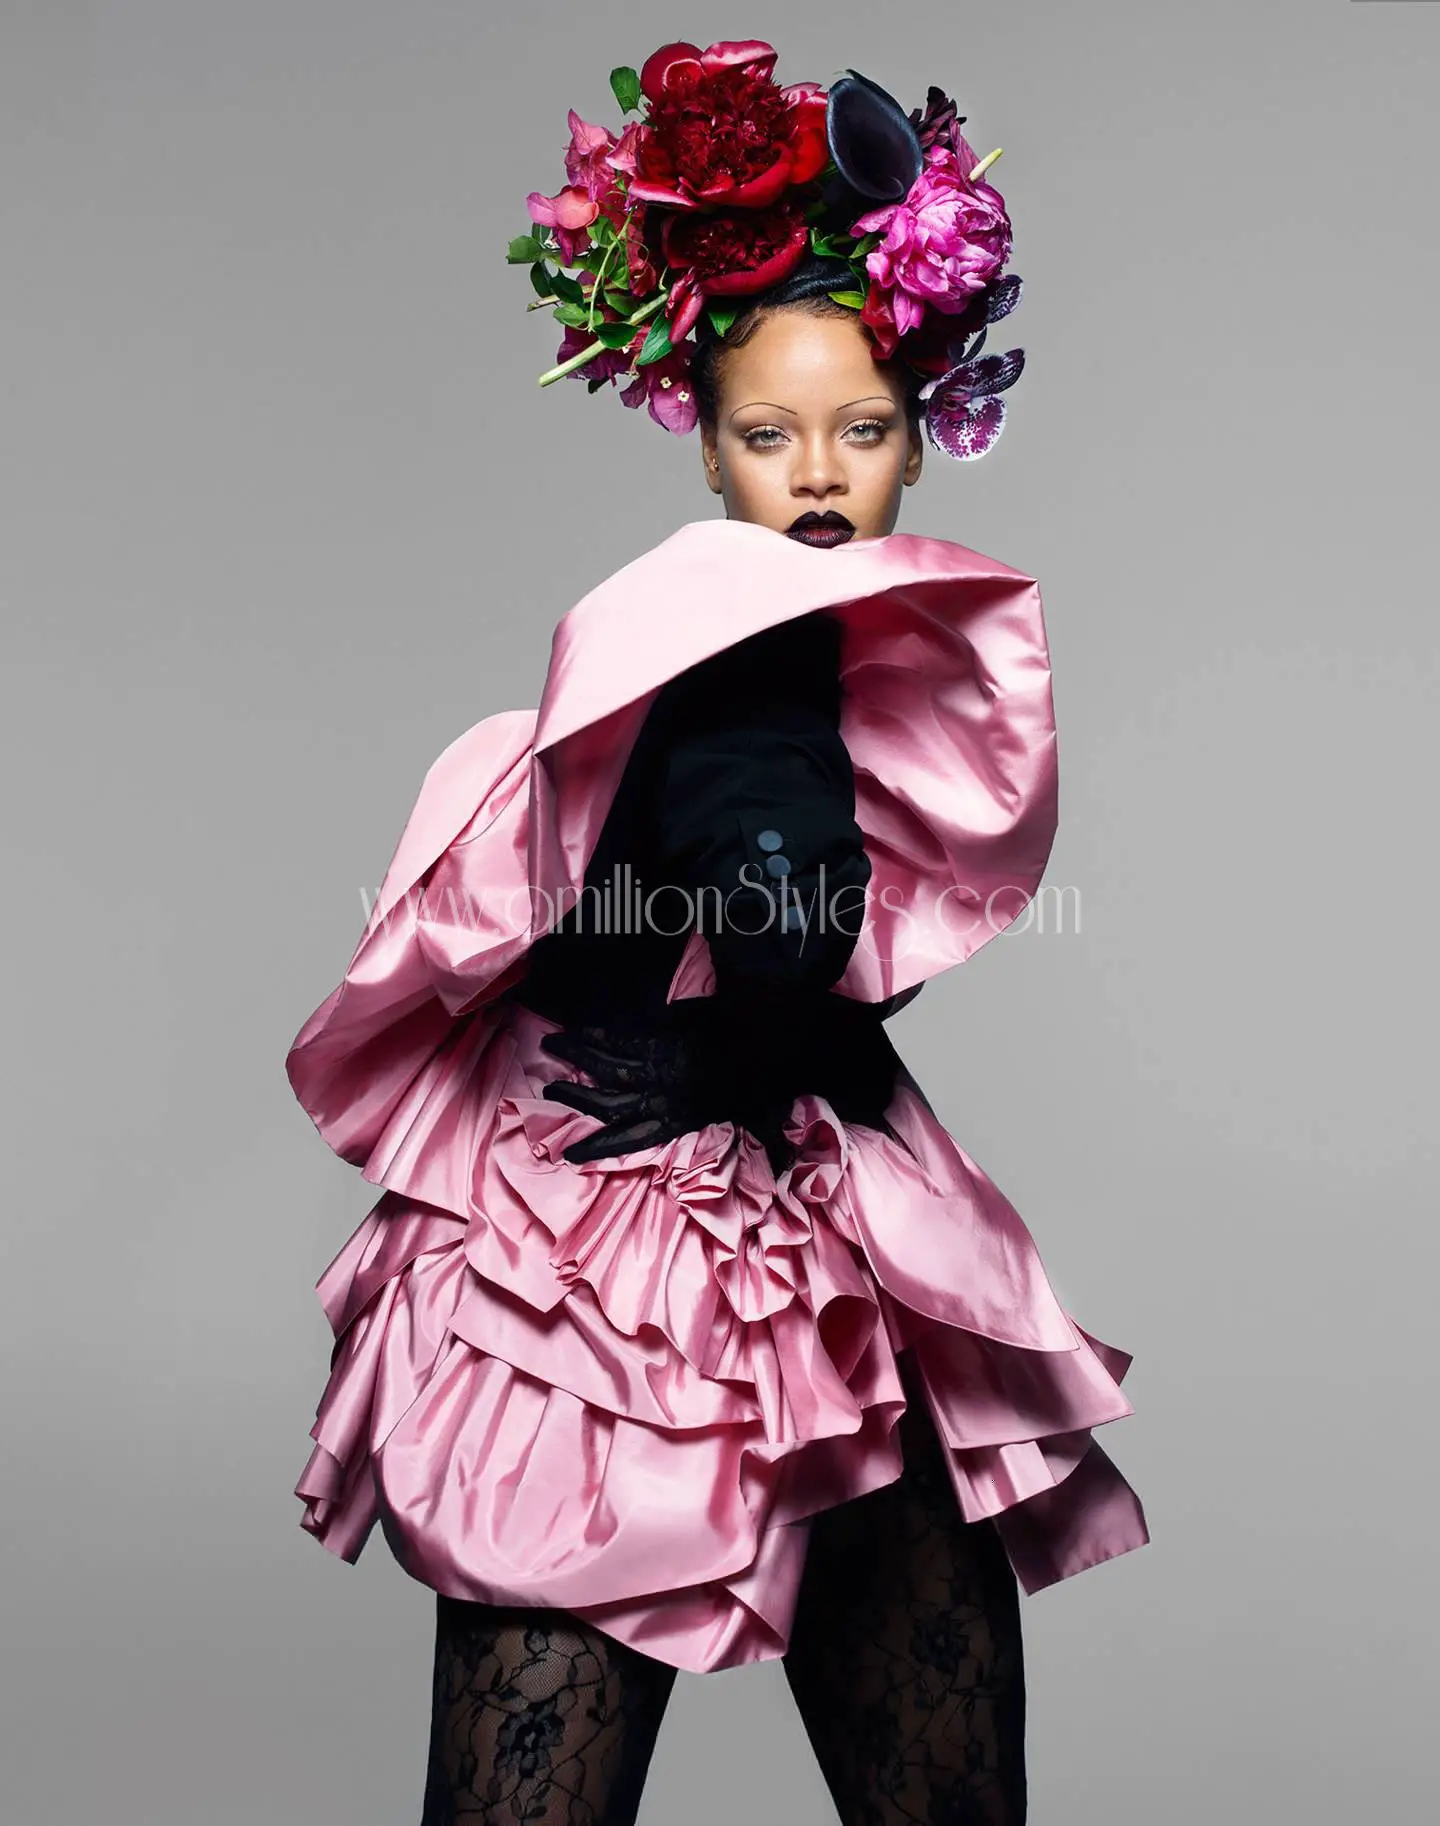 Rihanna Covers The Latest Issue Of British Vogue 